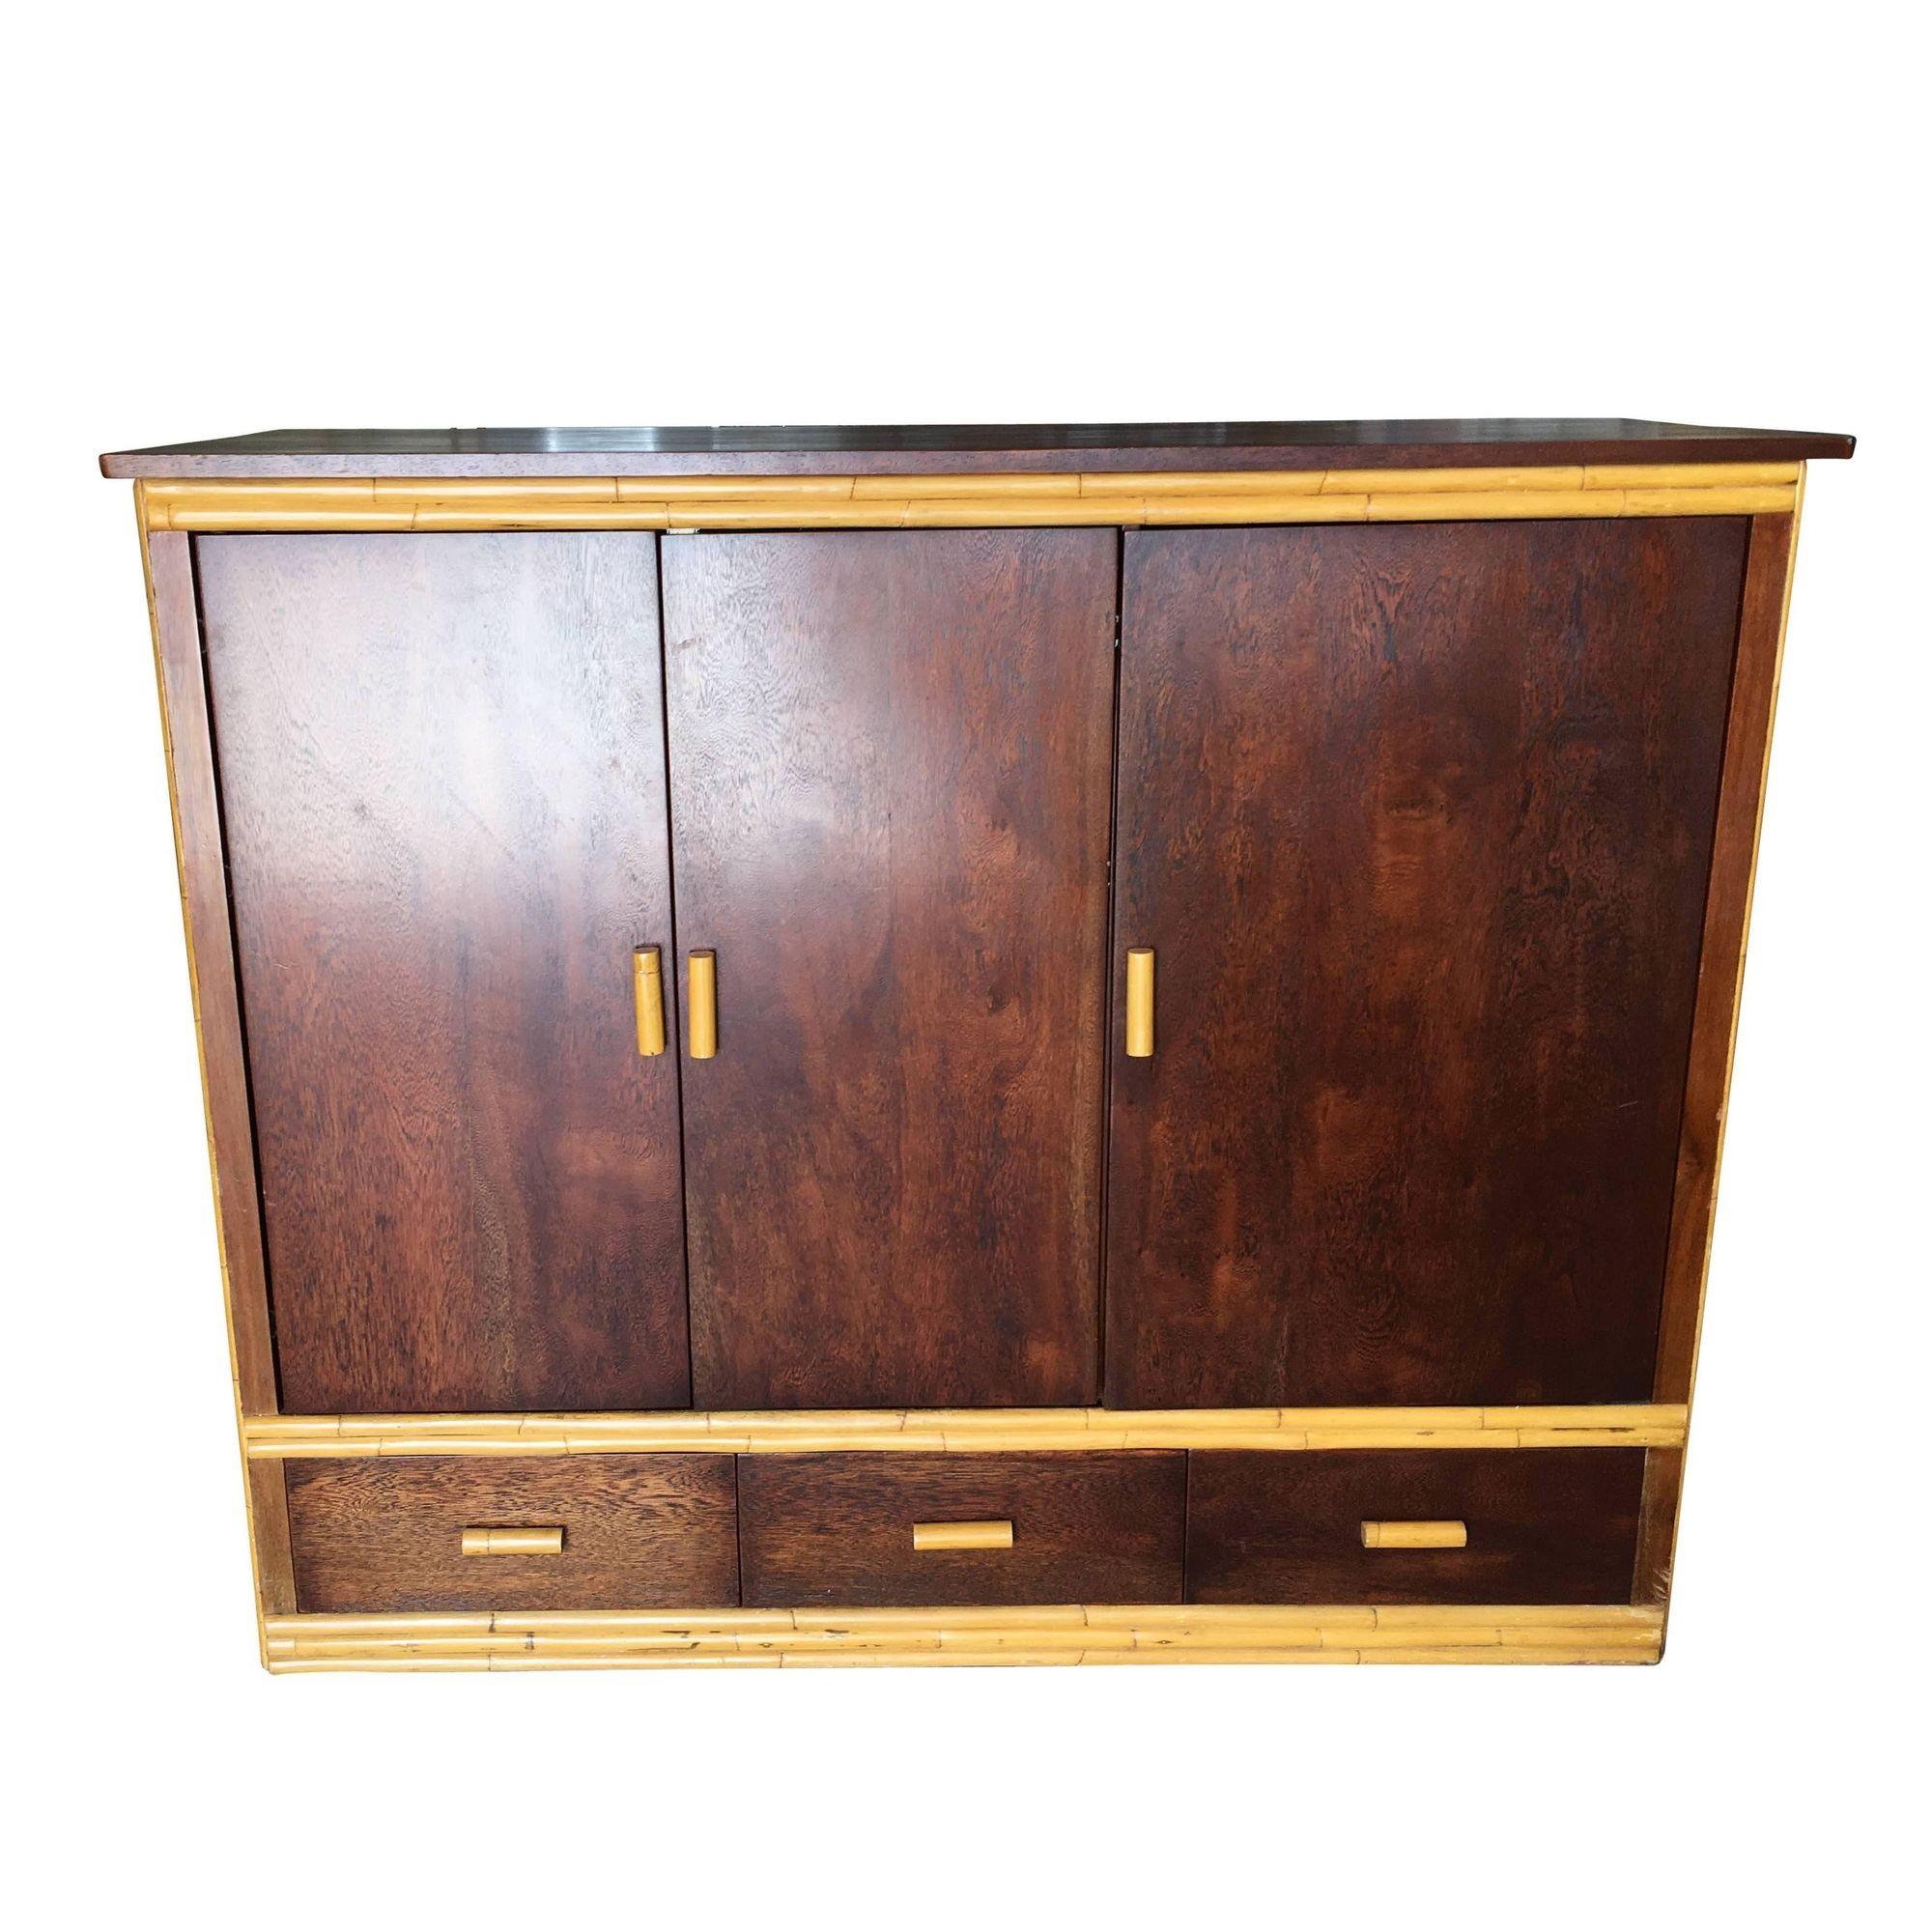 Large rattan and mahogany TV cabinet made with hideaway sliding doors, storage drawers, and adjustable component shelves. This cabinet opens with a middle TV shelf and an additional side component rack with six adjustable shelves for a Roku, DVD,